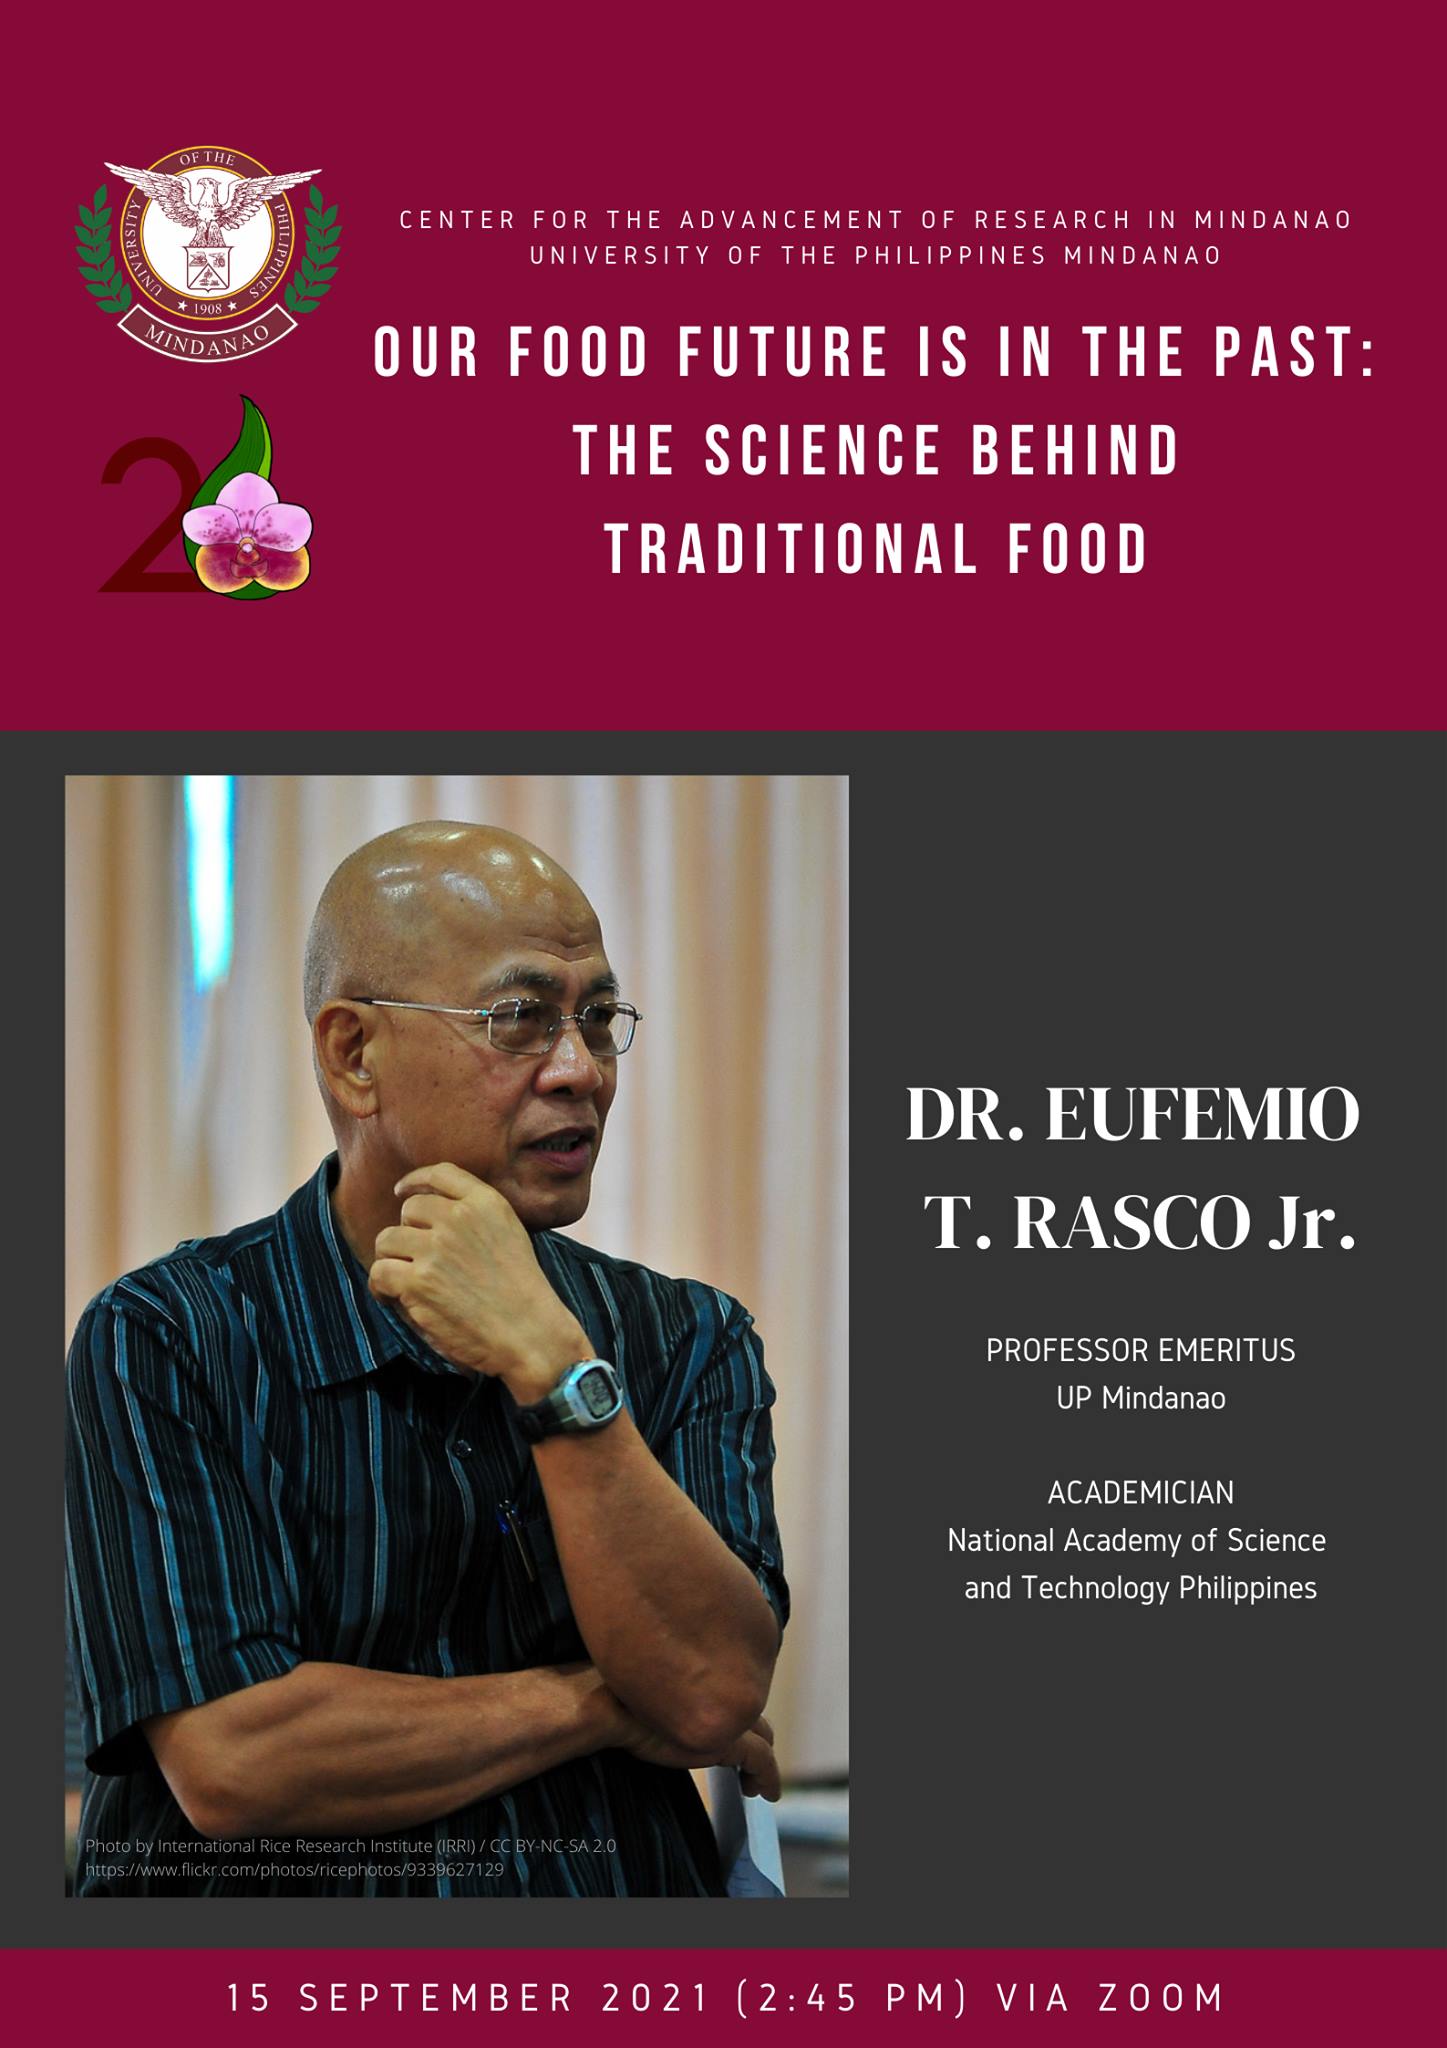 Looking at traditional food as the alternate future of Philippine food